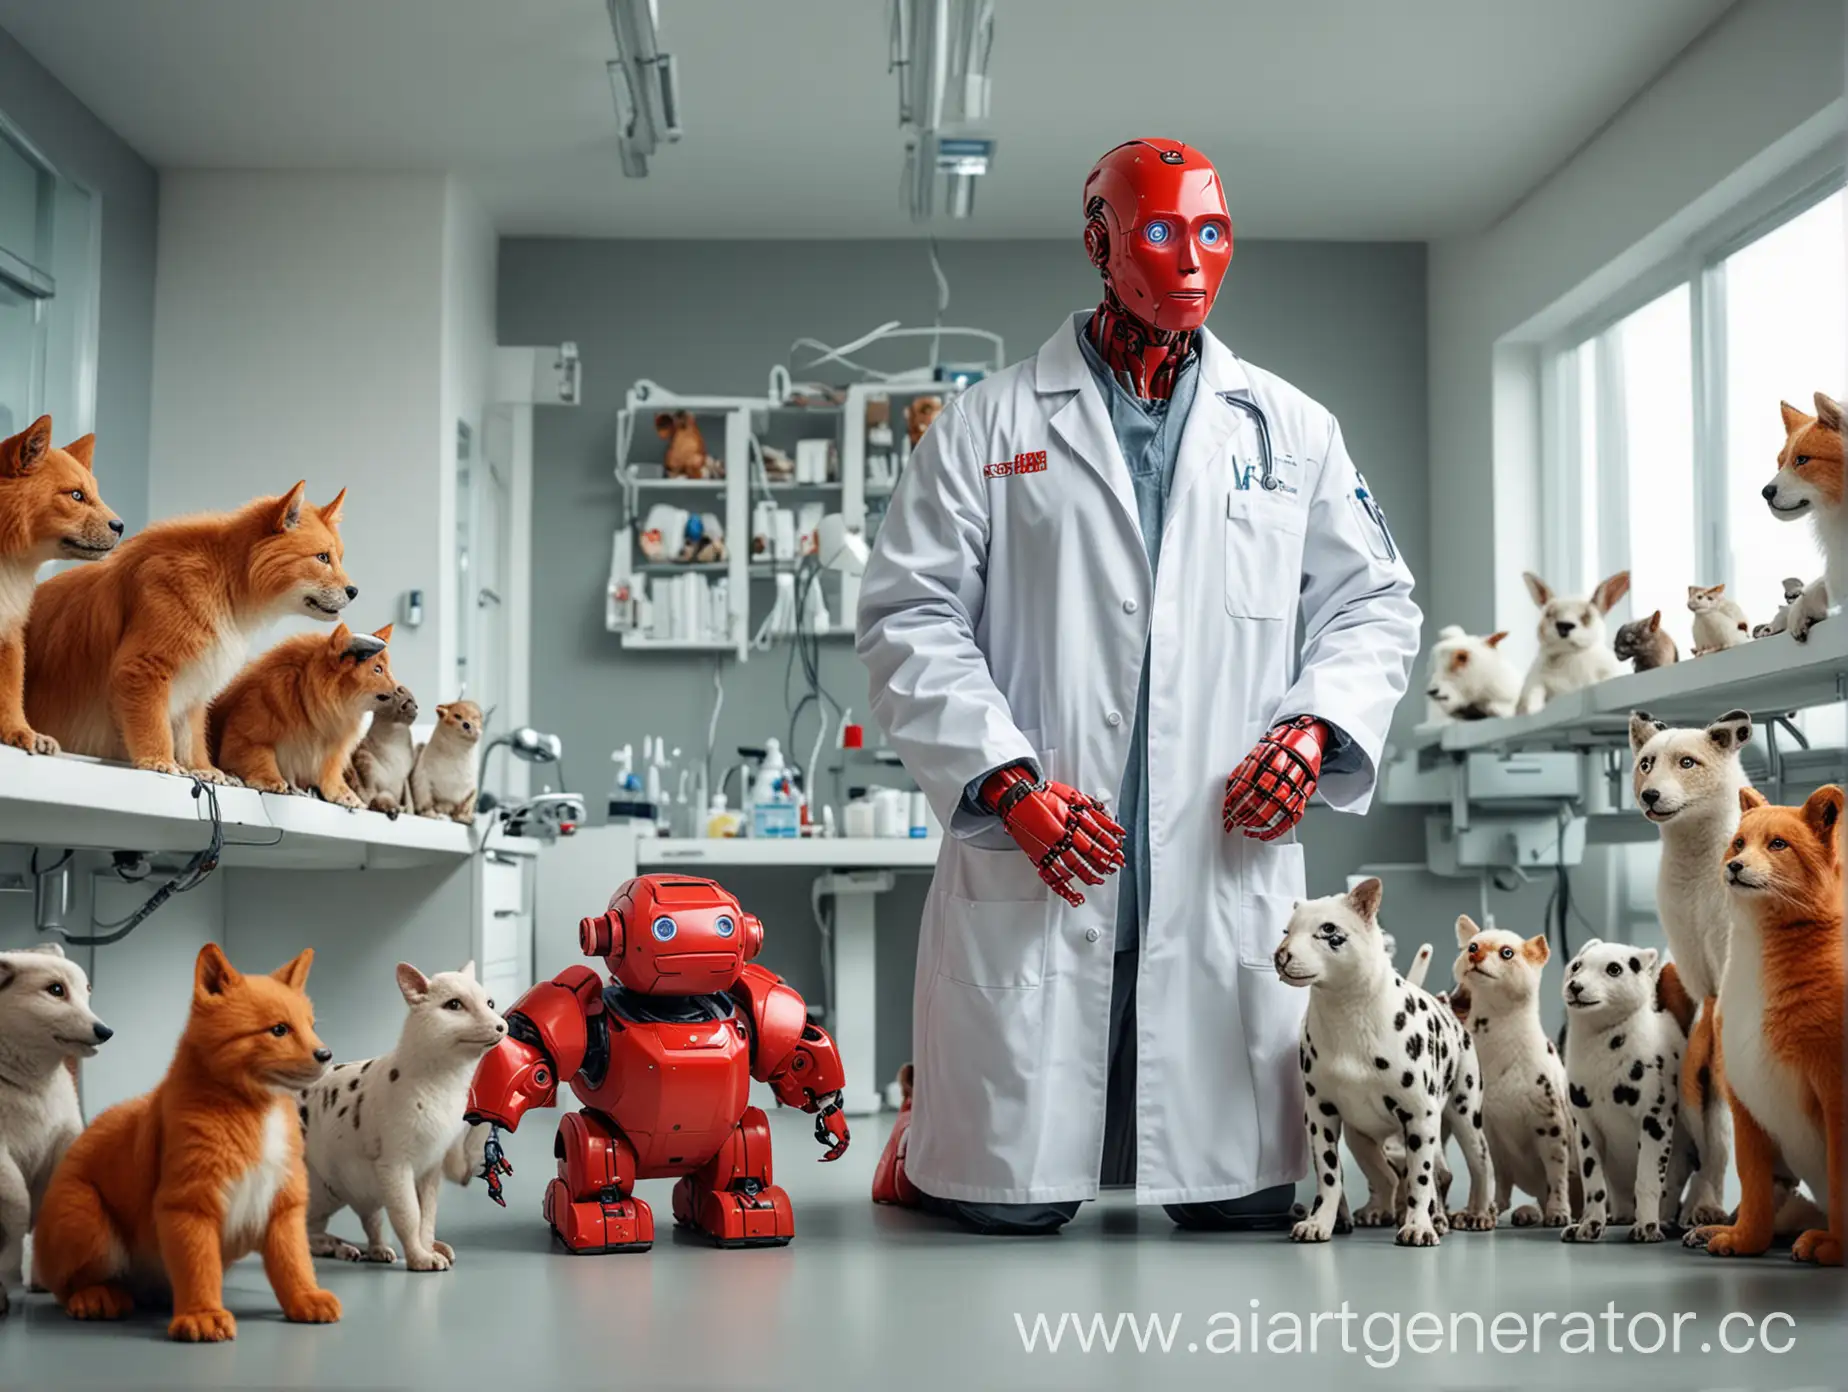 Friendly-Robot-Veterinarian-Caring-for-Animals-in-Veterinary-Clinic